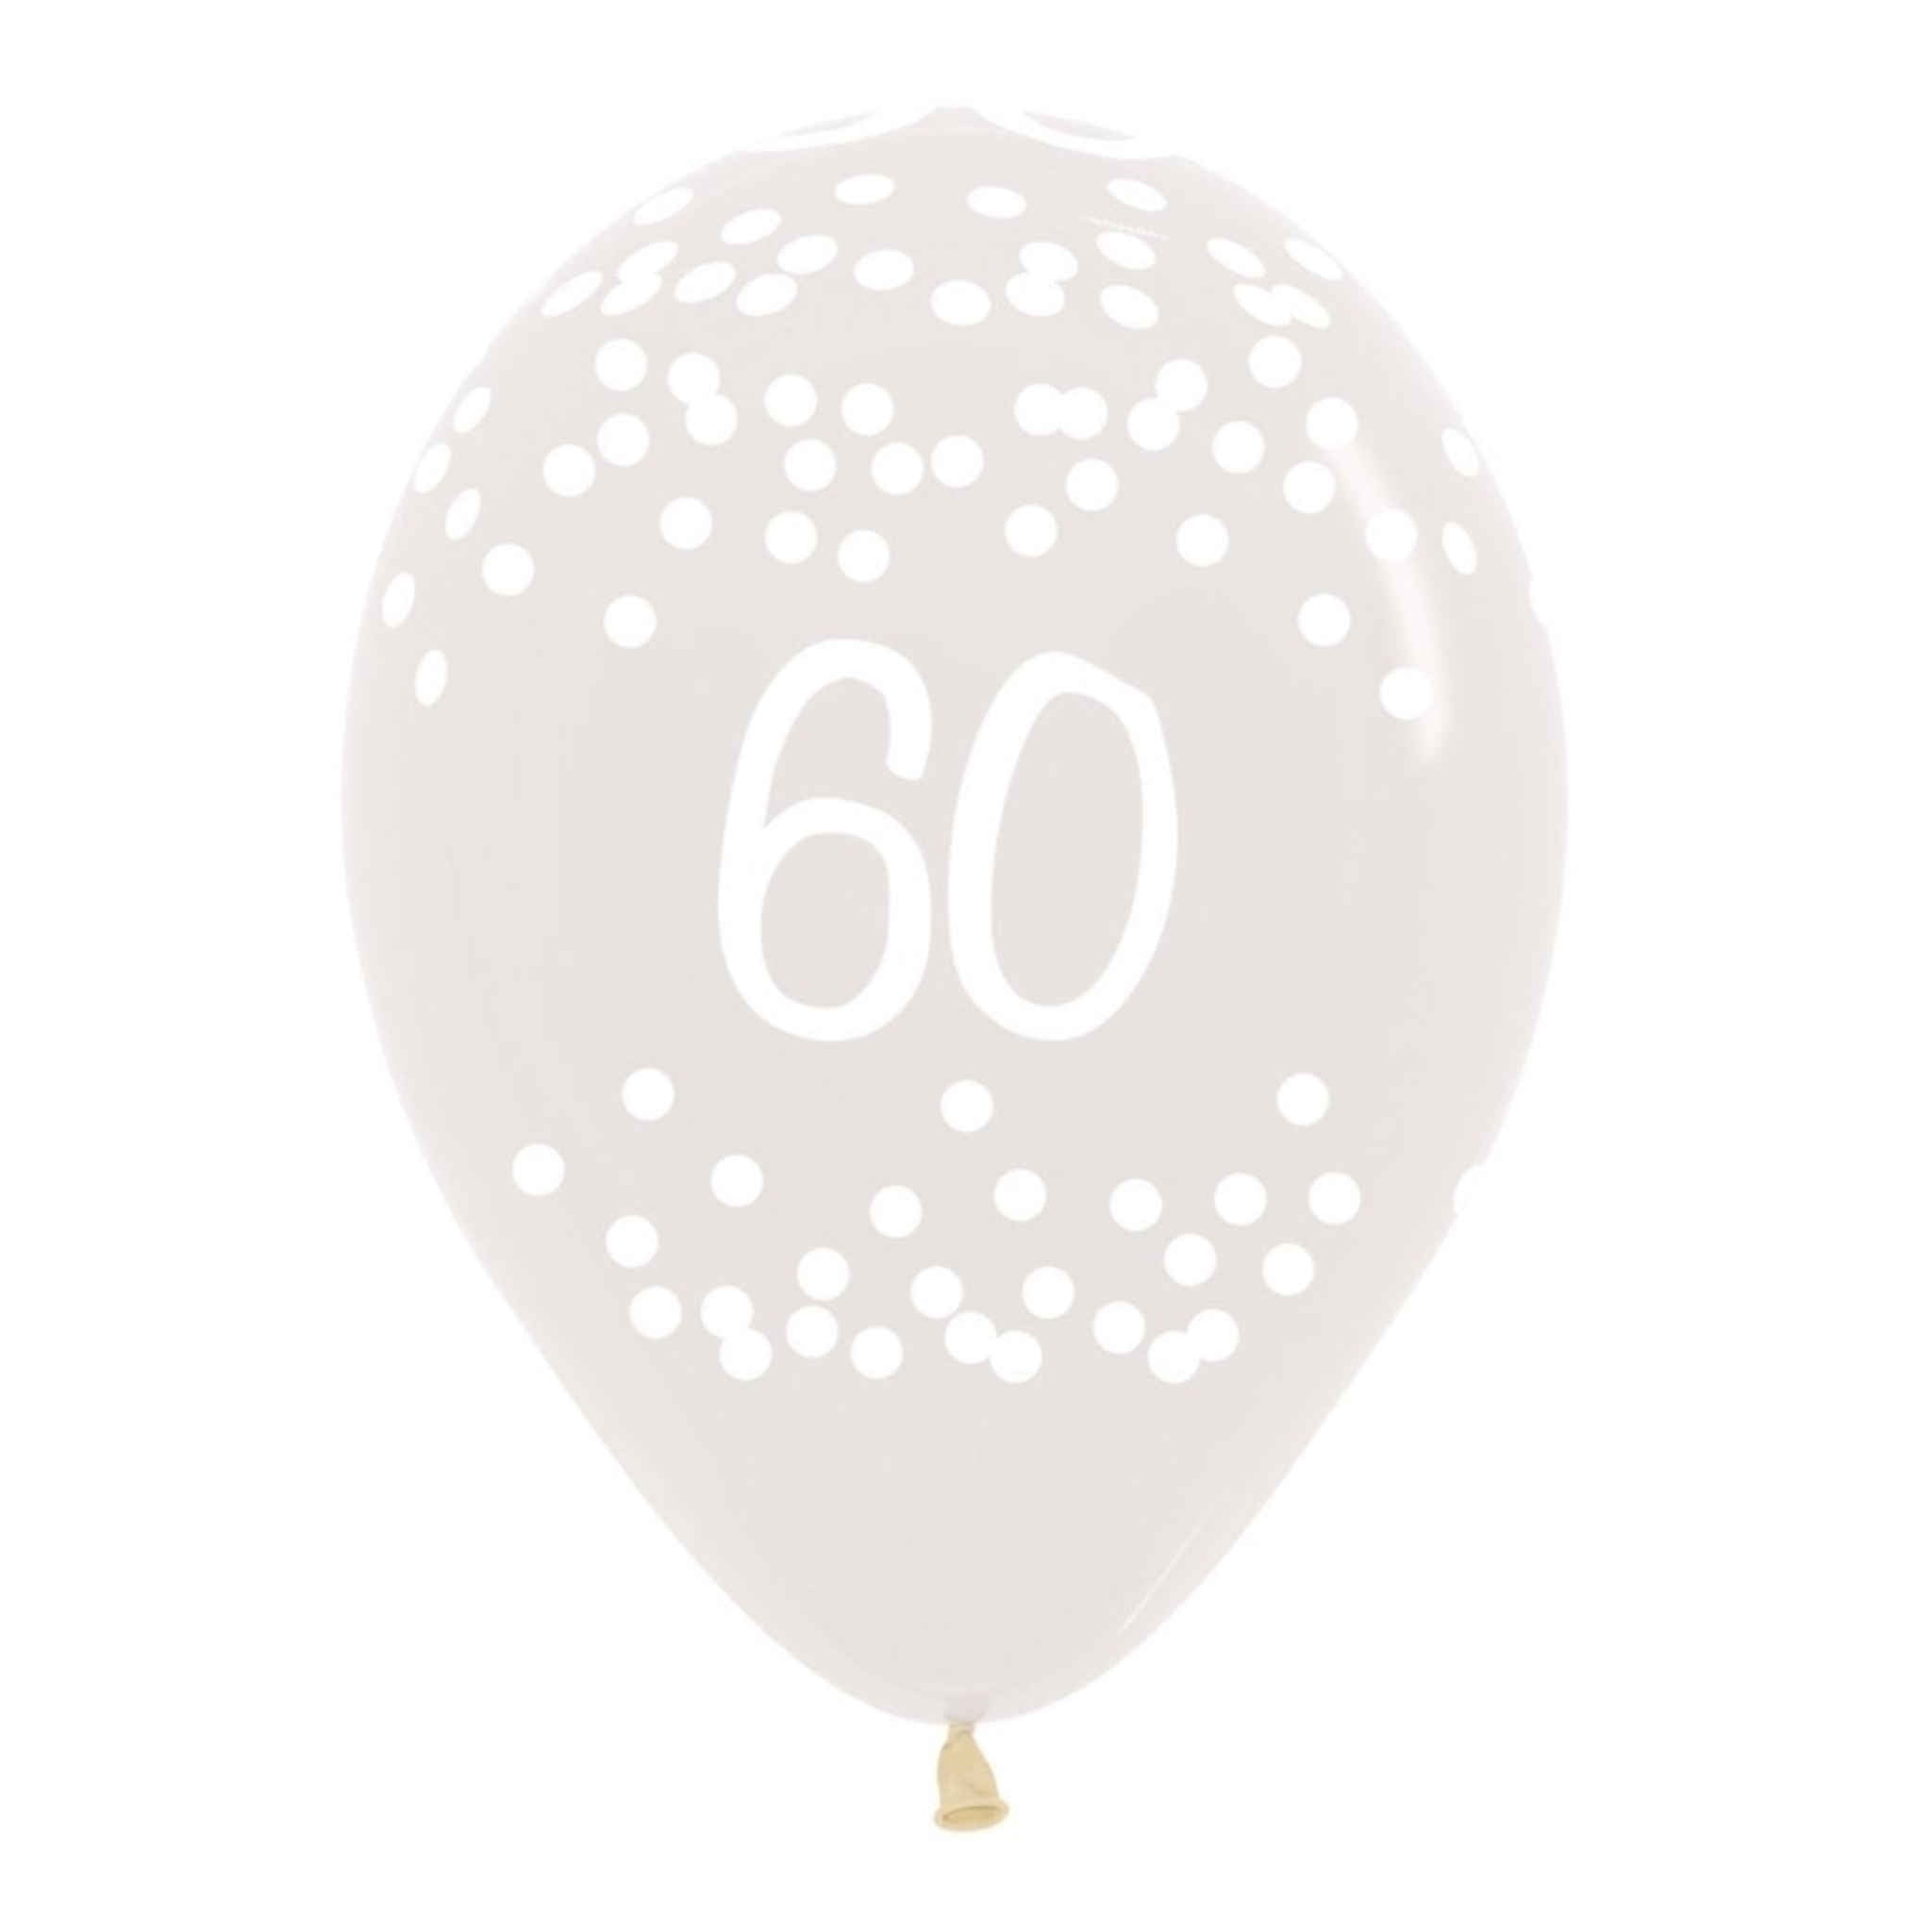 Round Crystal Clear 60th Birthday Polka Dots Balloons | 25 Pack | 12 inch